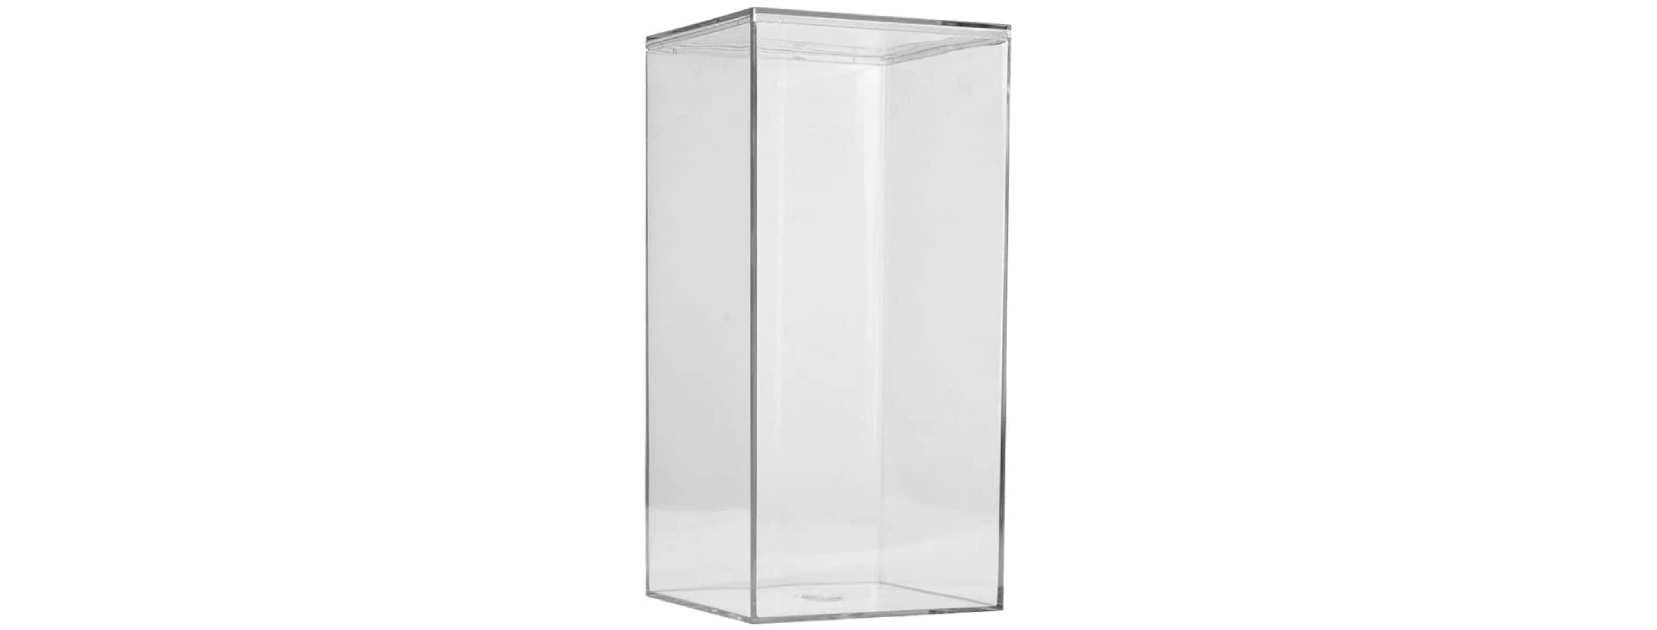 Hammont Clear Acrylic Boxes 3 Pack 8x4x4